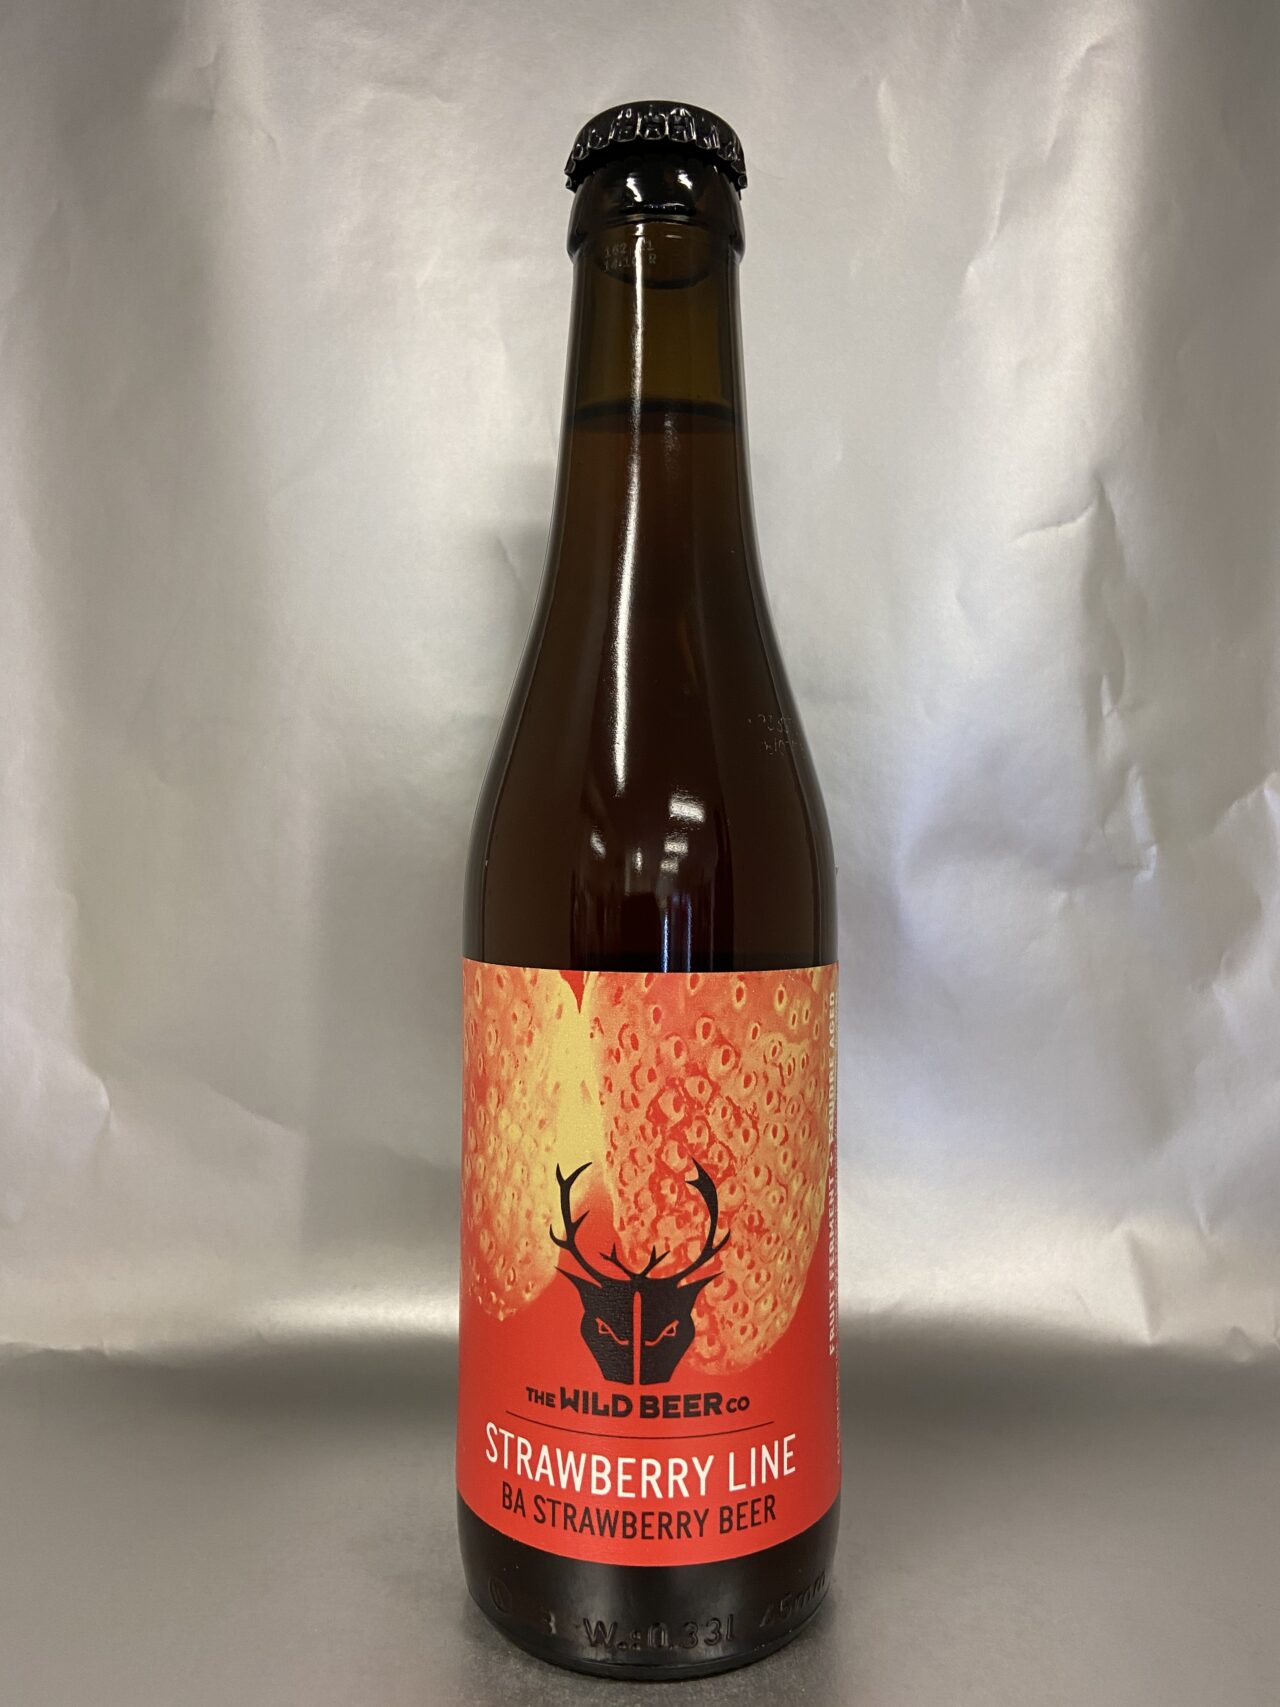 THE WILD BEER - STRAWBERRY LINE